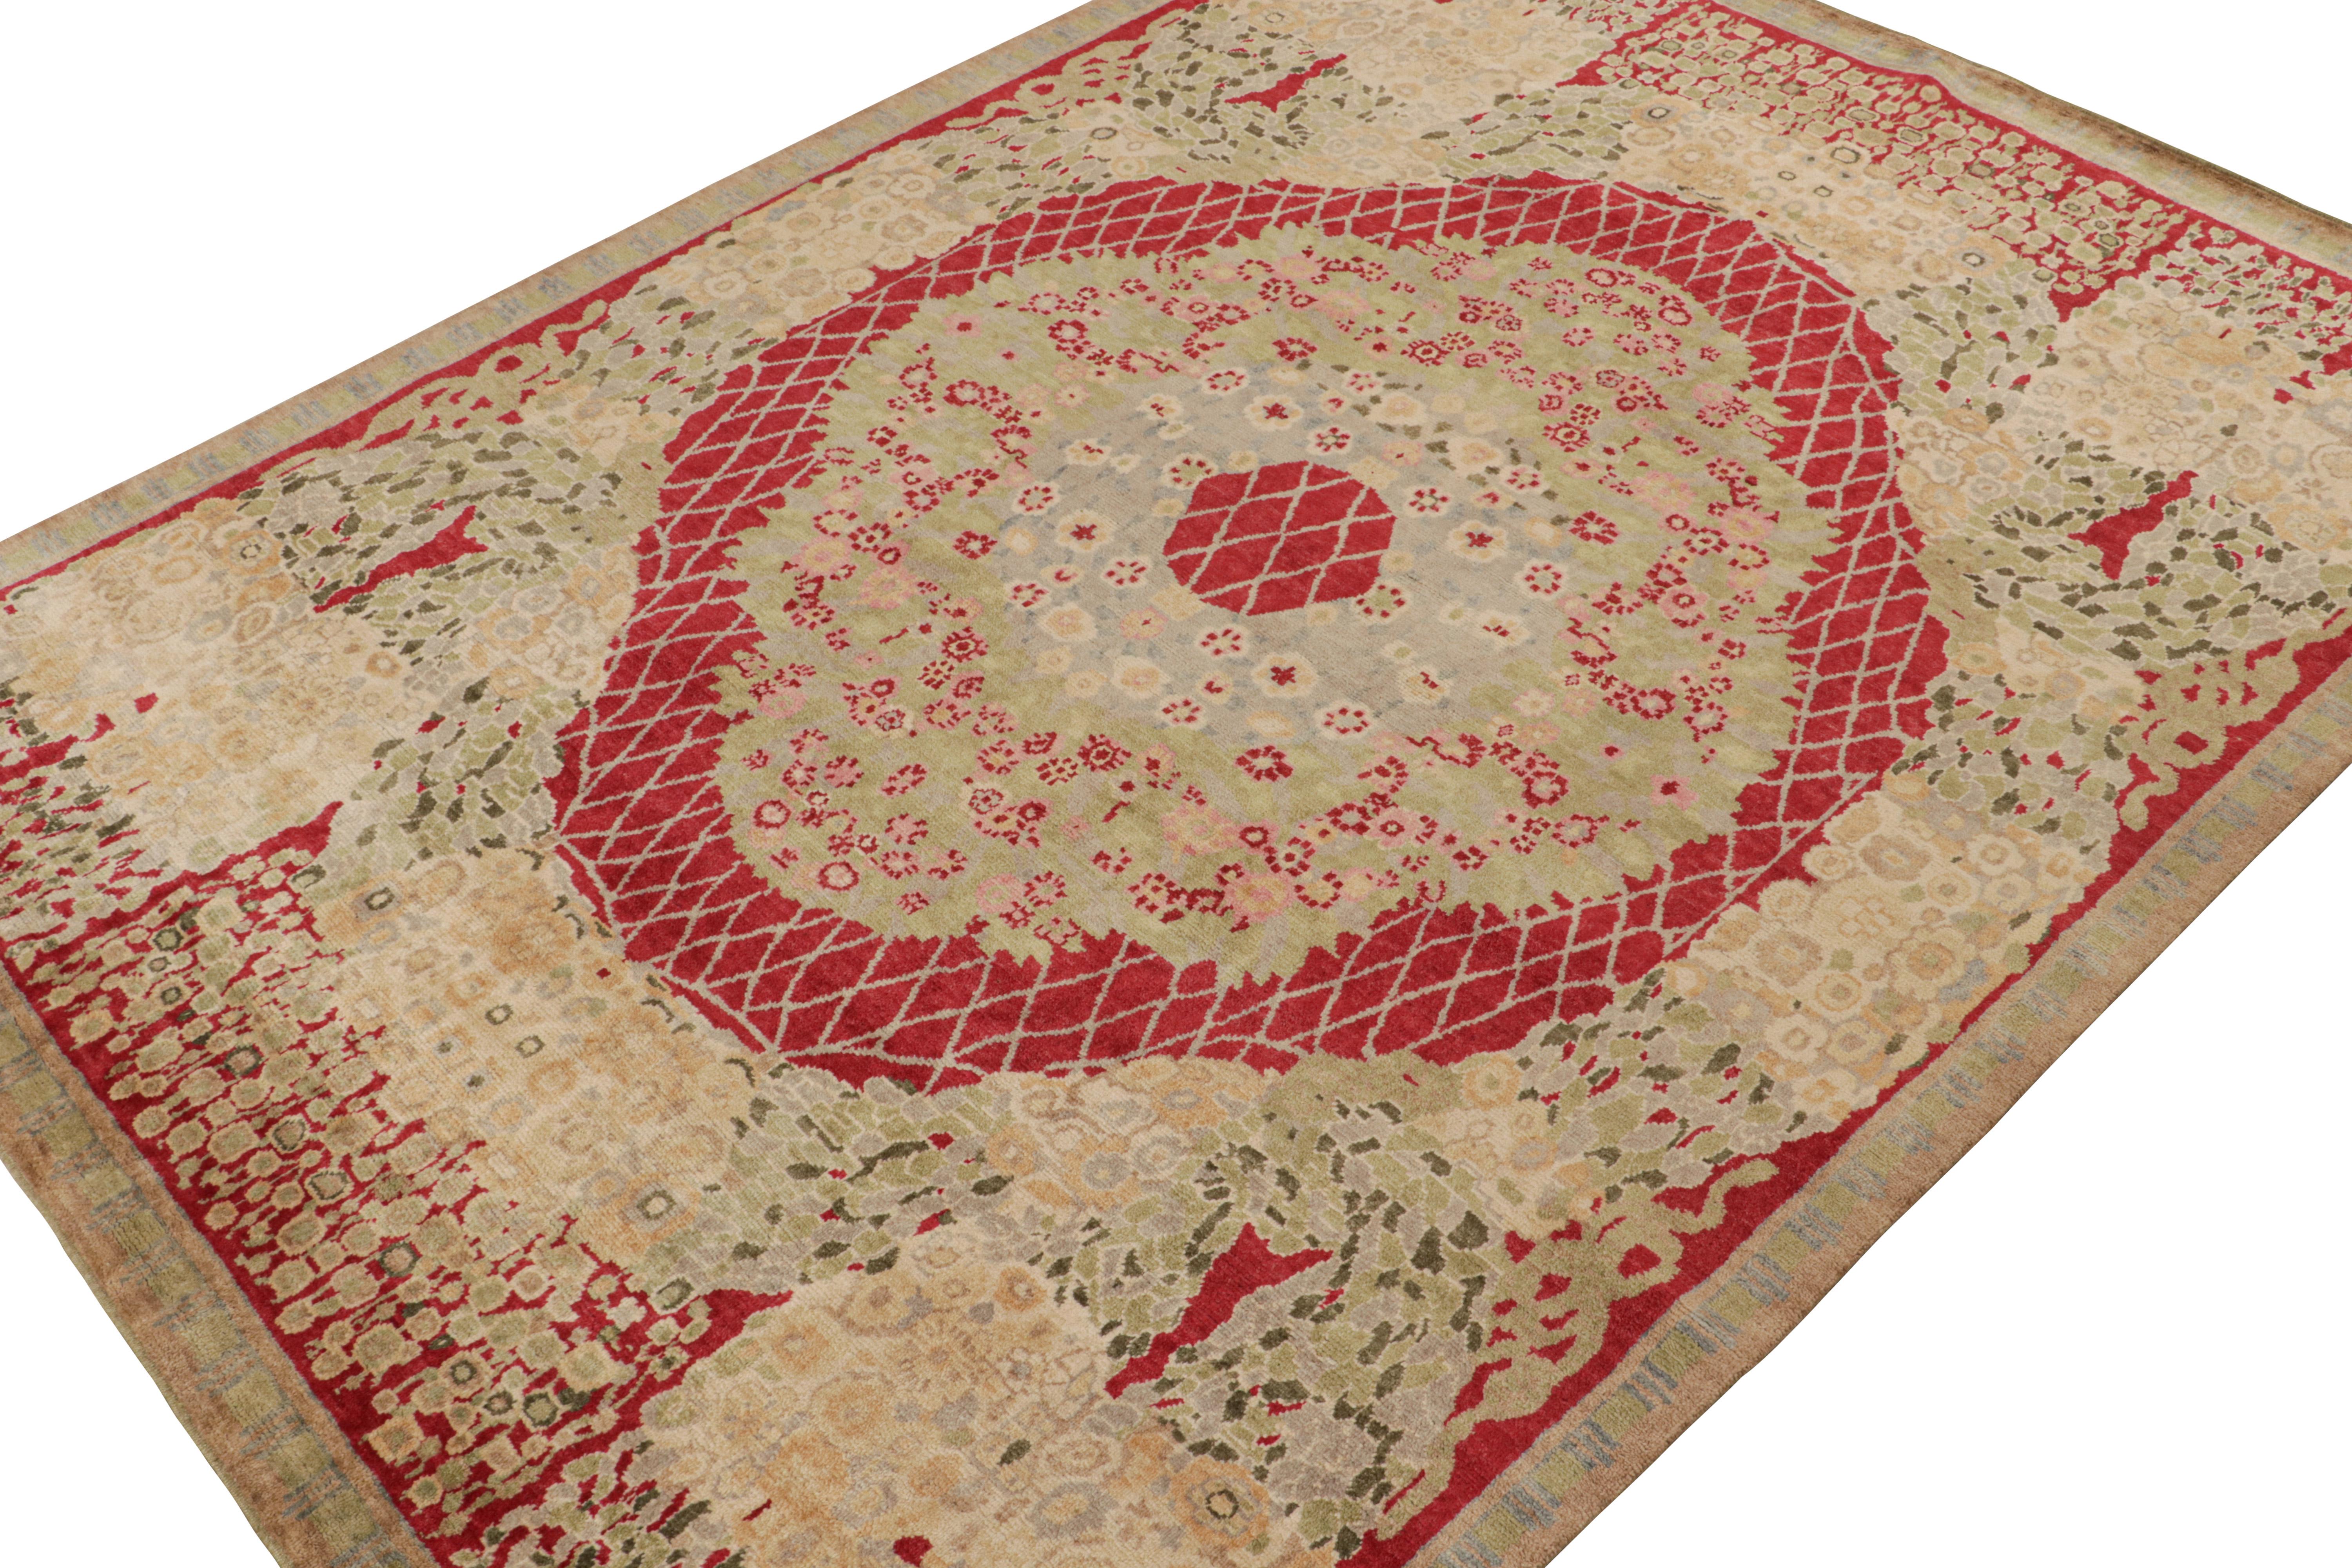 Hand-Knotted Rug & Kilim’s French Style Art Deco Rug in Red, Green, Gold & Blue Patterns For Sale